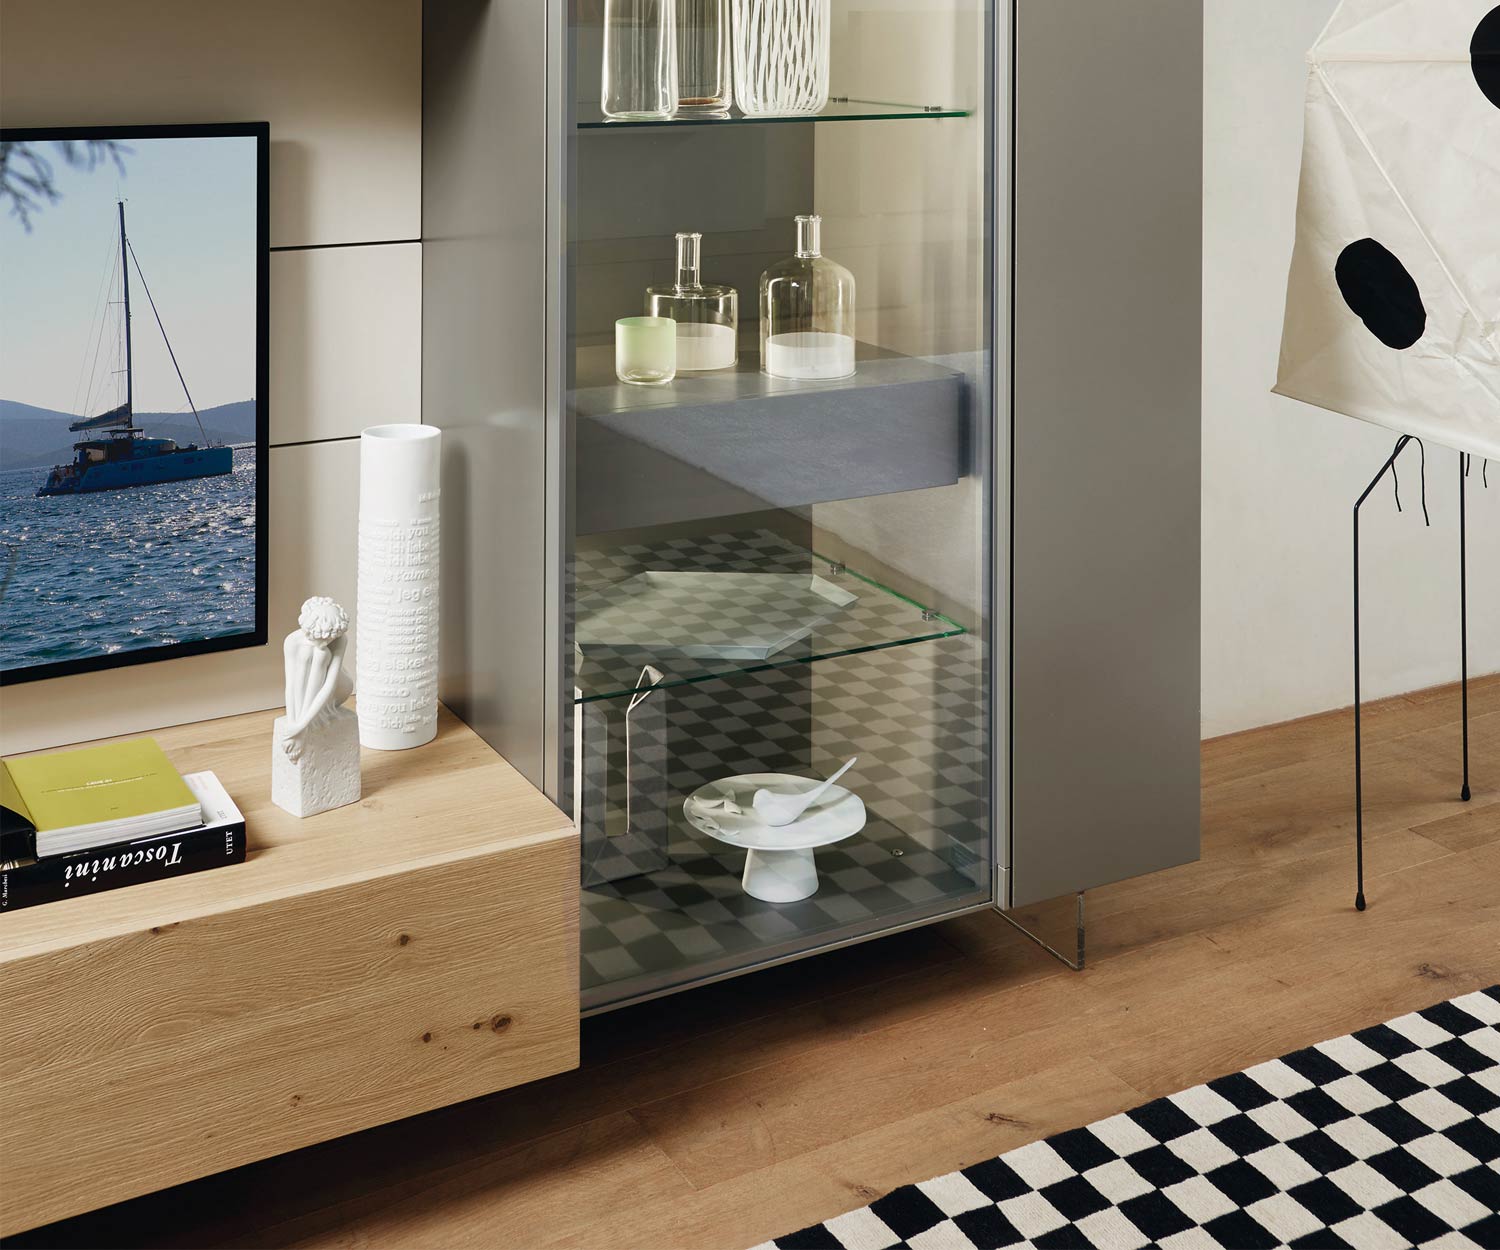 Modern Livitalia Design wall unit C42 in detail View of the glass cabinet in grey